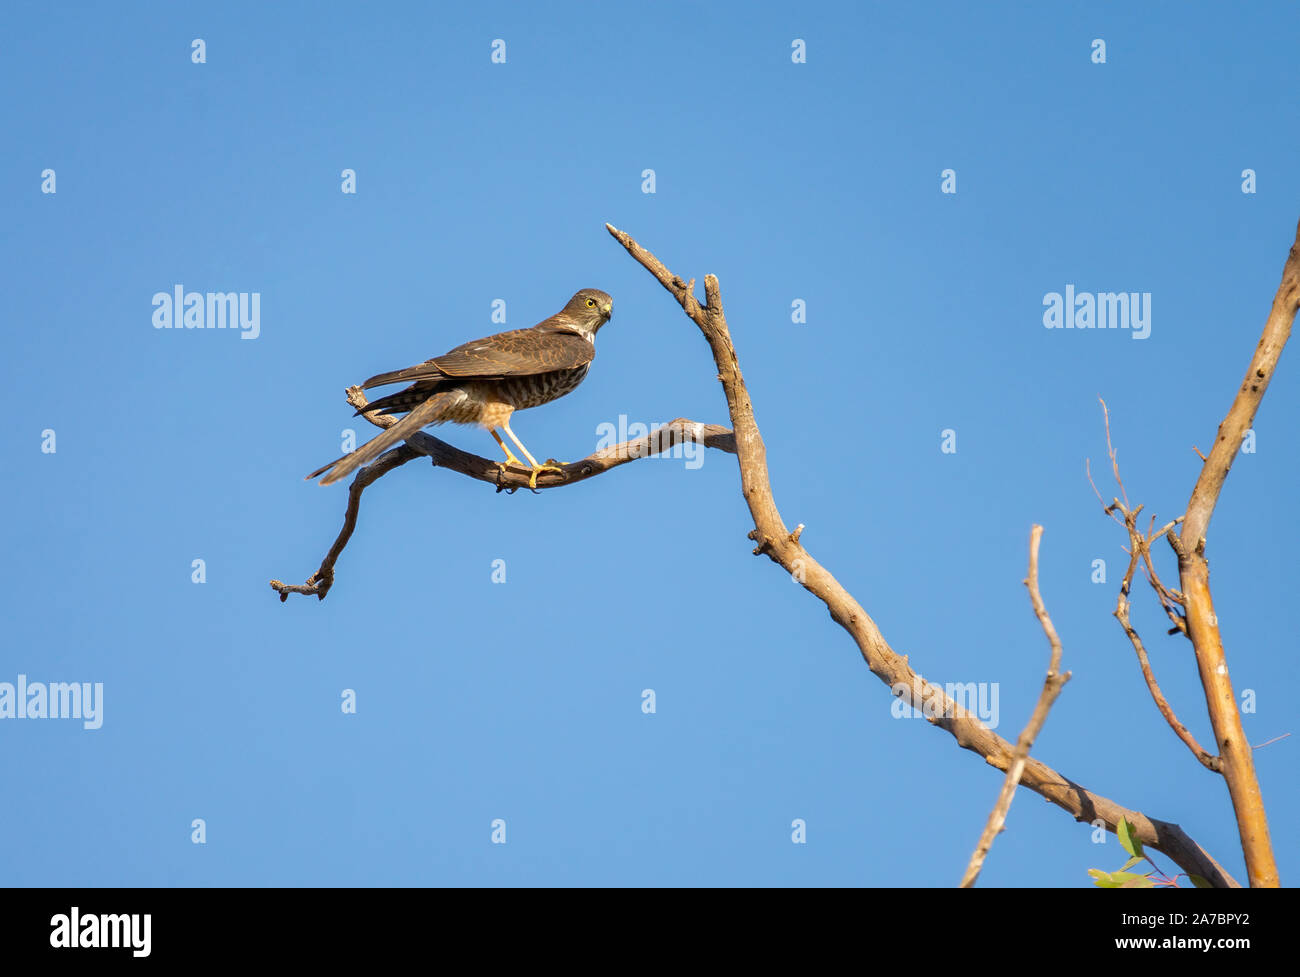 A Brown Goshawk perched at the top of a dead tree against a clear blue sky Stock Photo